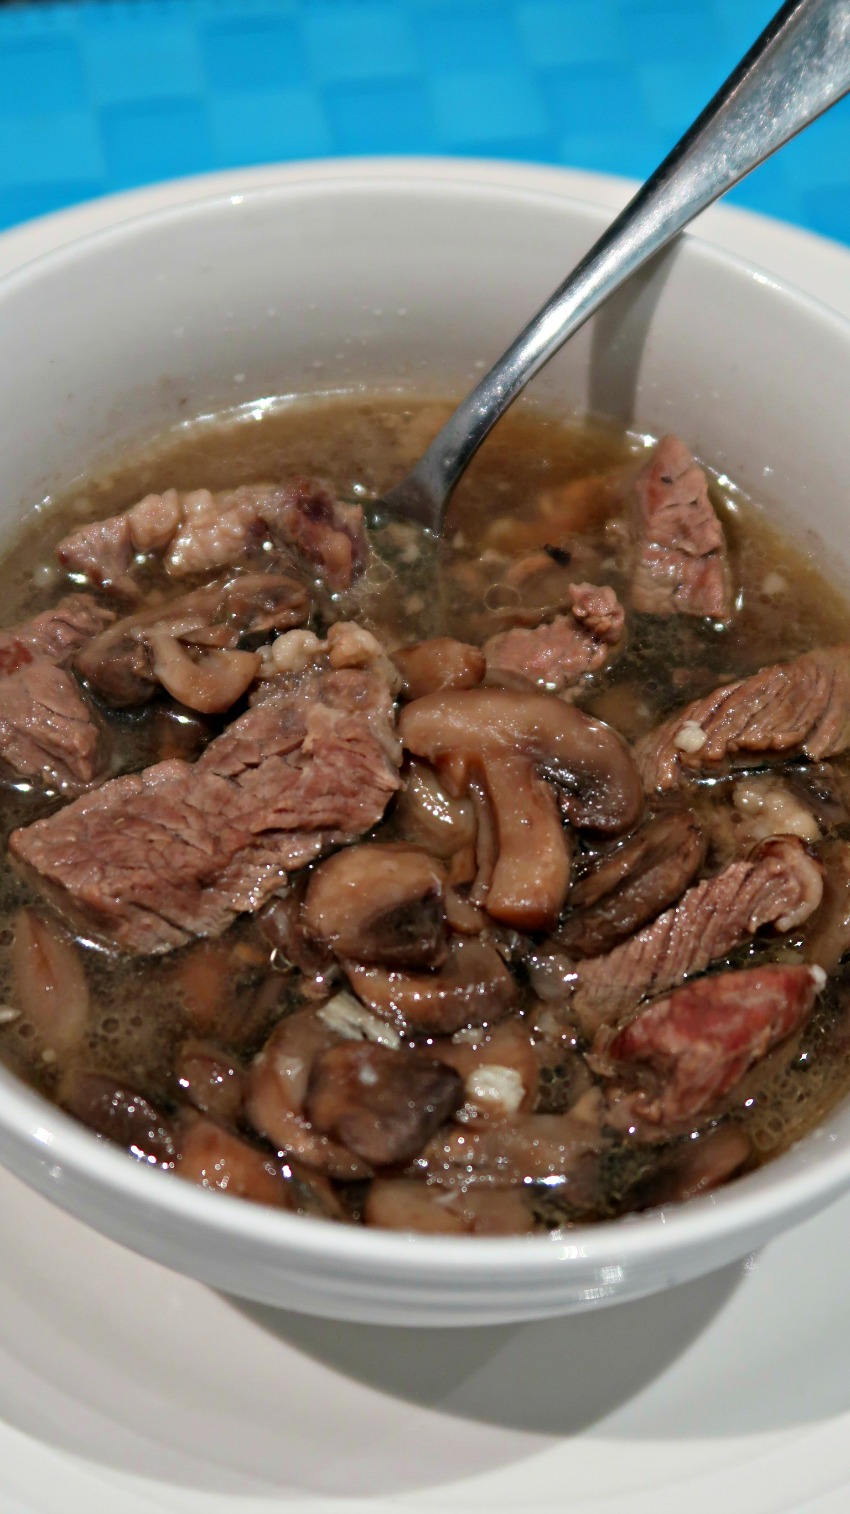 Beef and Mushroom Soup Recipe - Low carb, keto diet soup recipe plus video tutorial. One of the easiest keto soups!